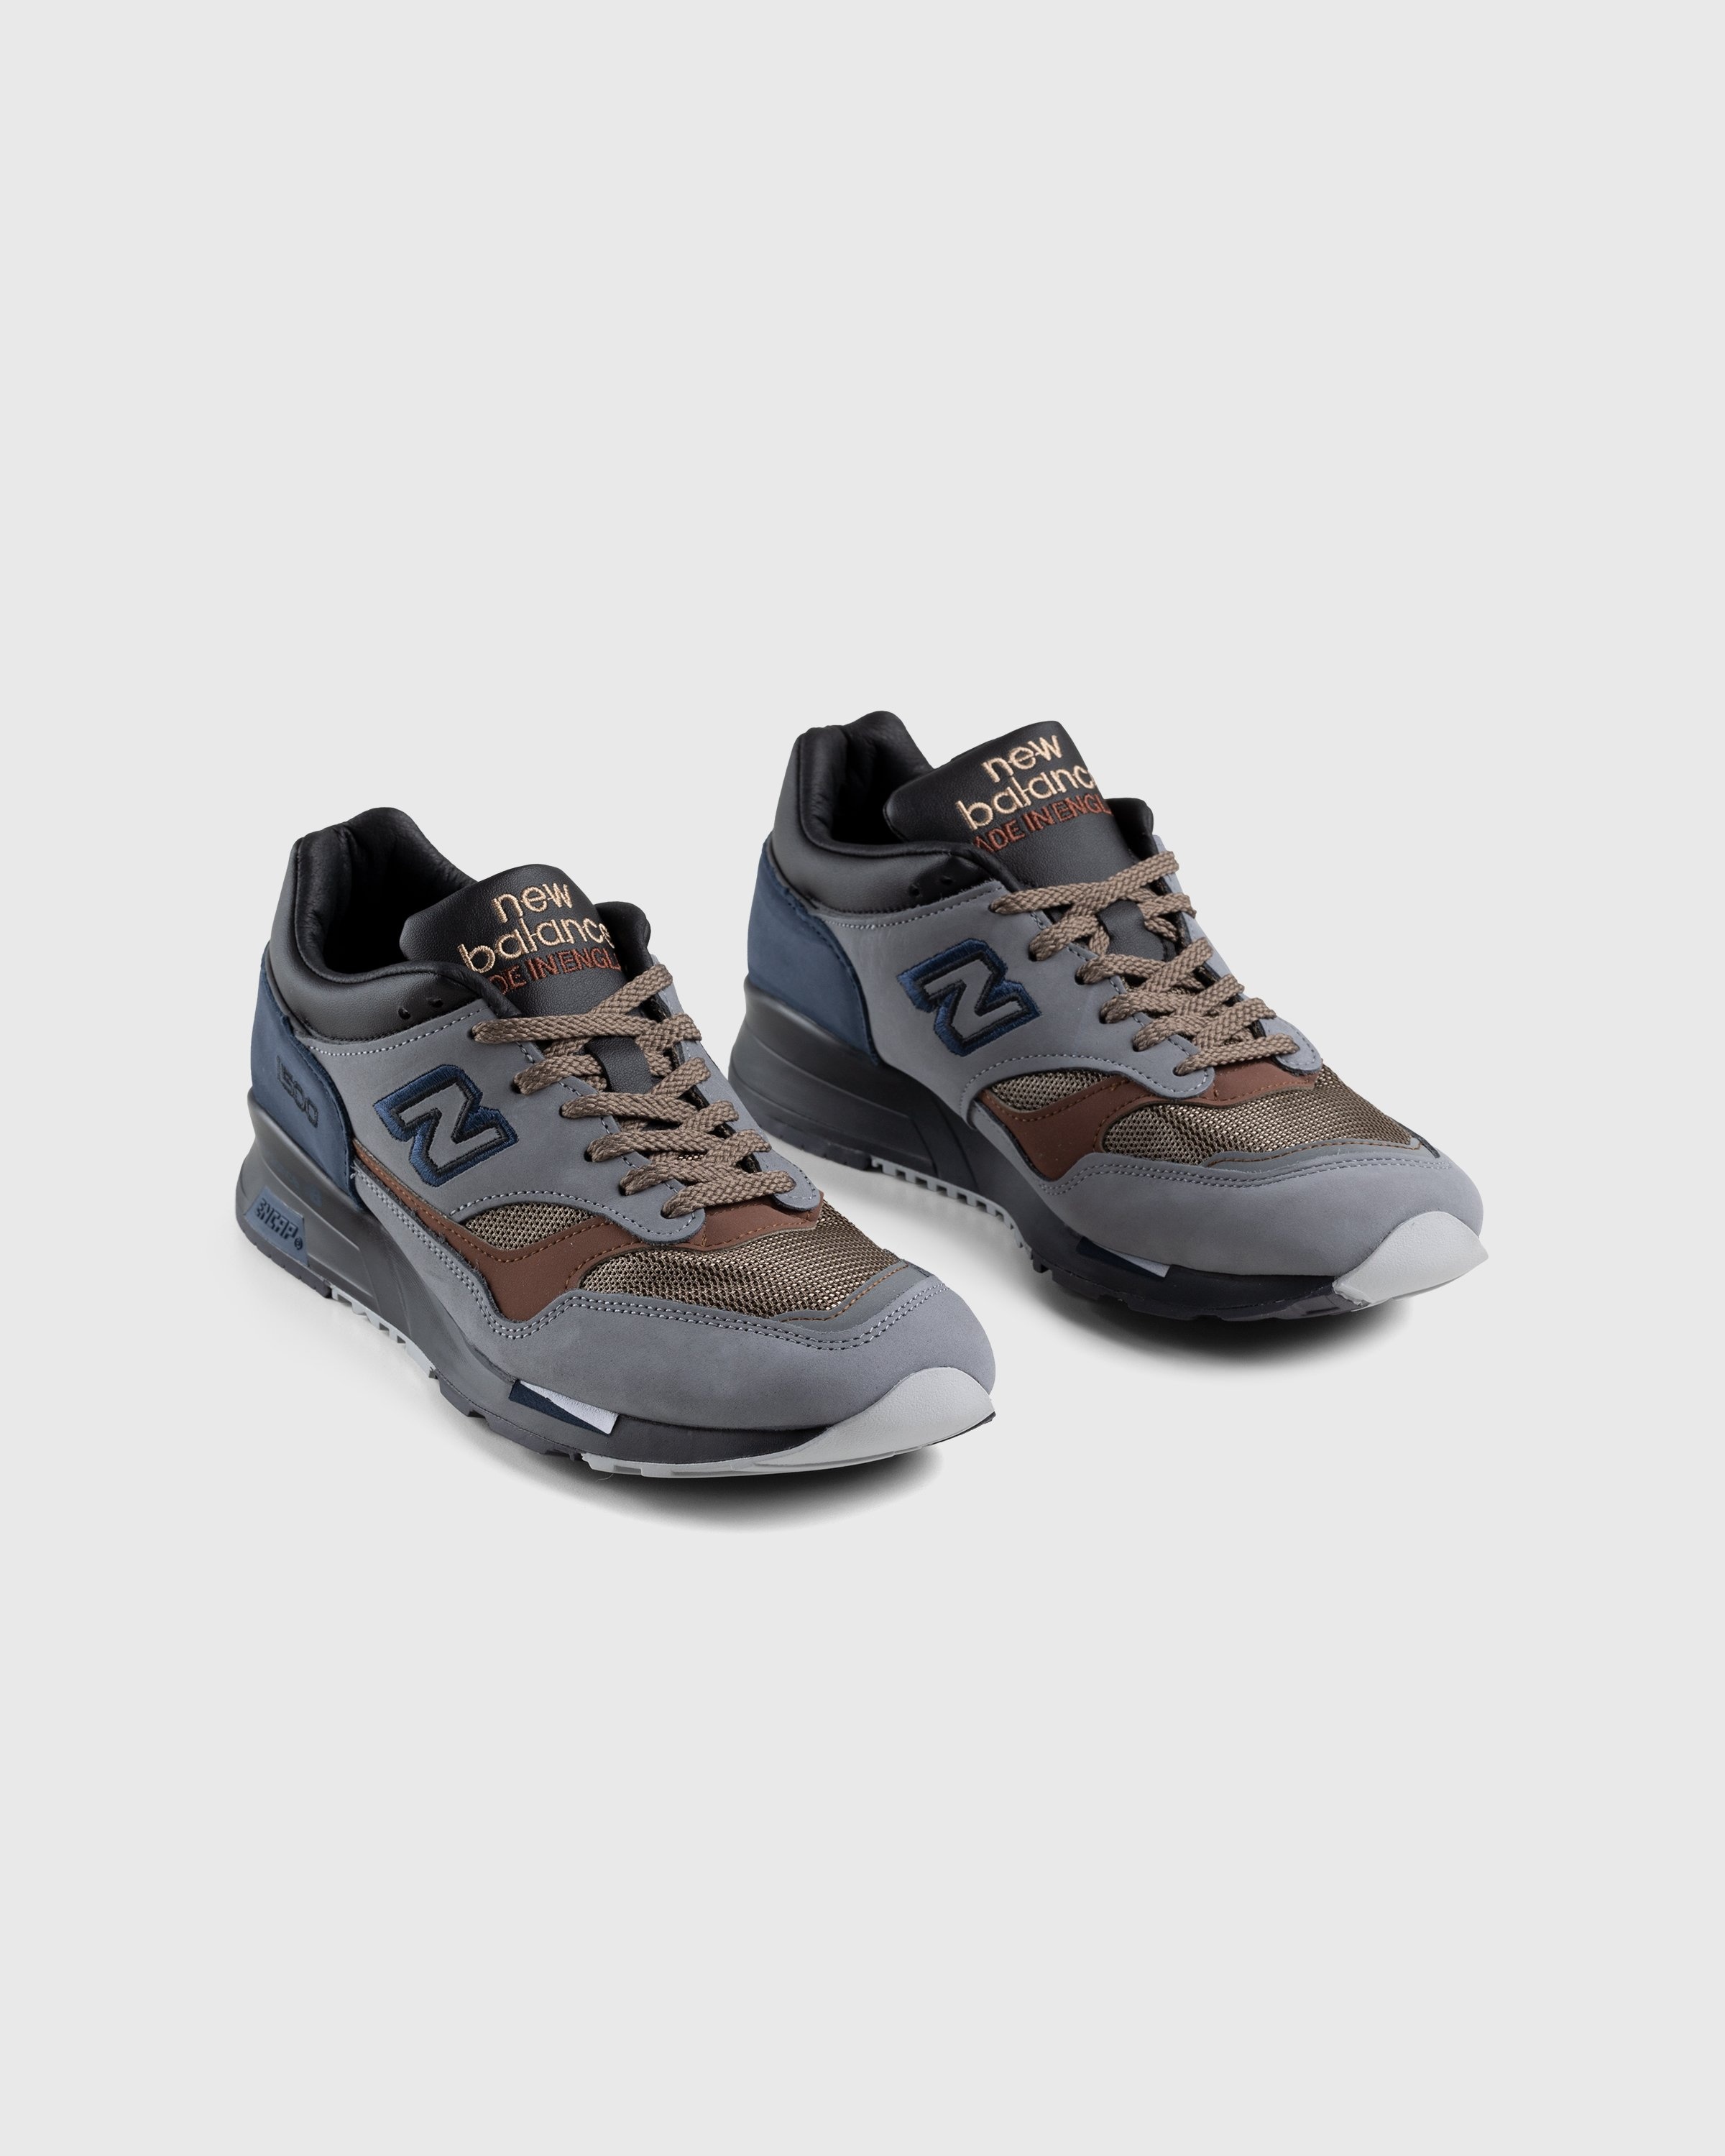 New Balance – M1500INV Grey/Black - Low Top Sneakers - Grey - Image 3